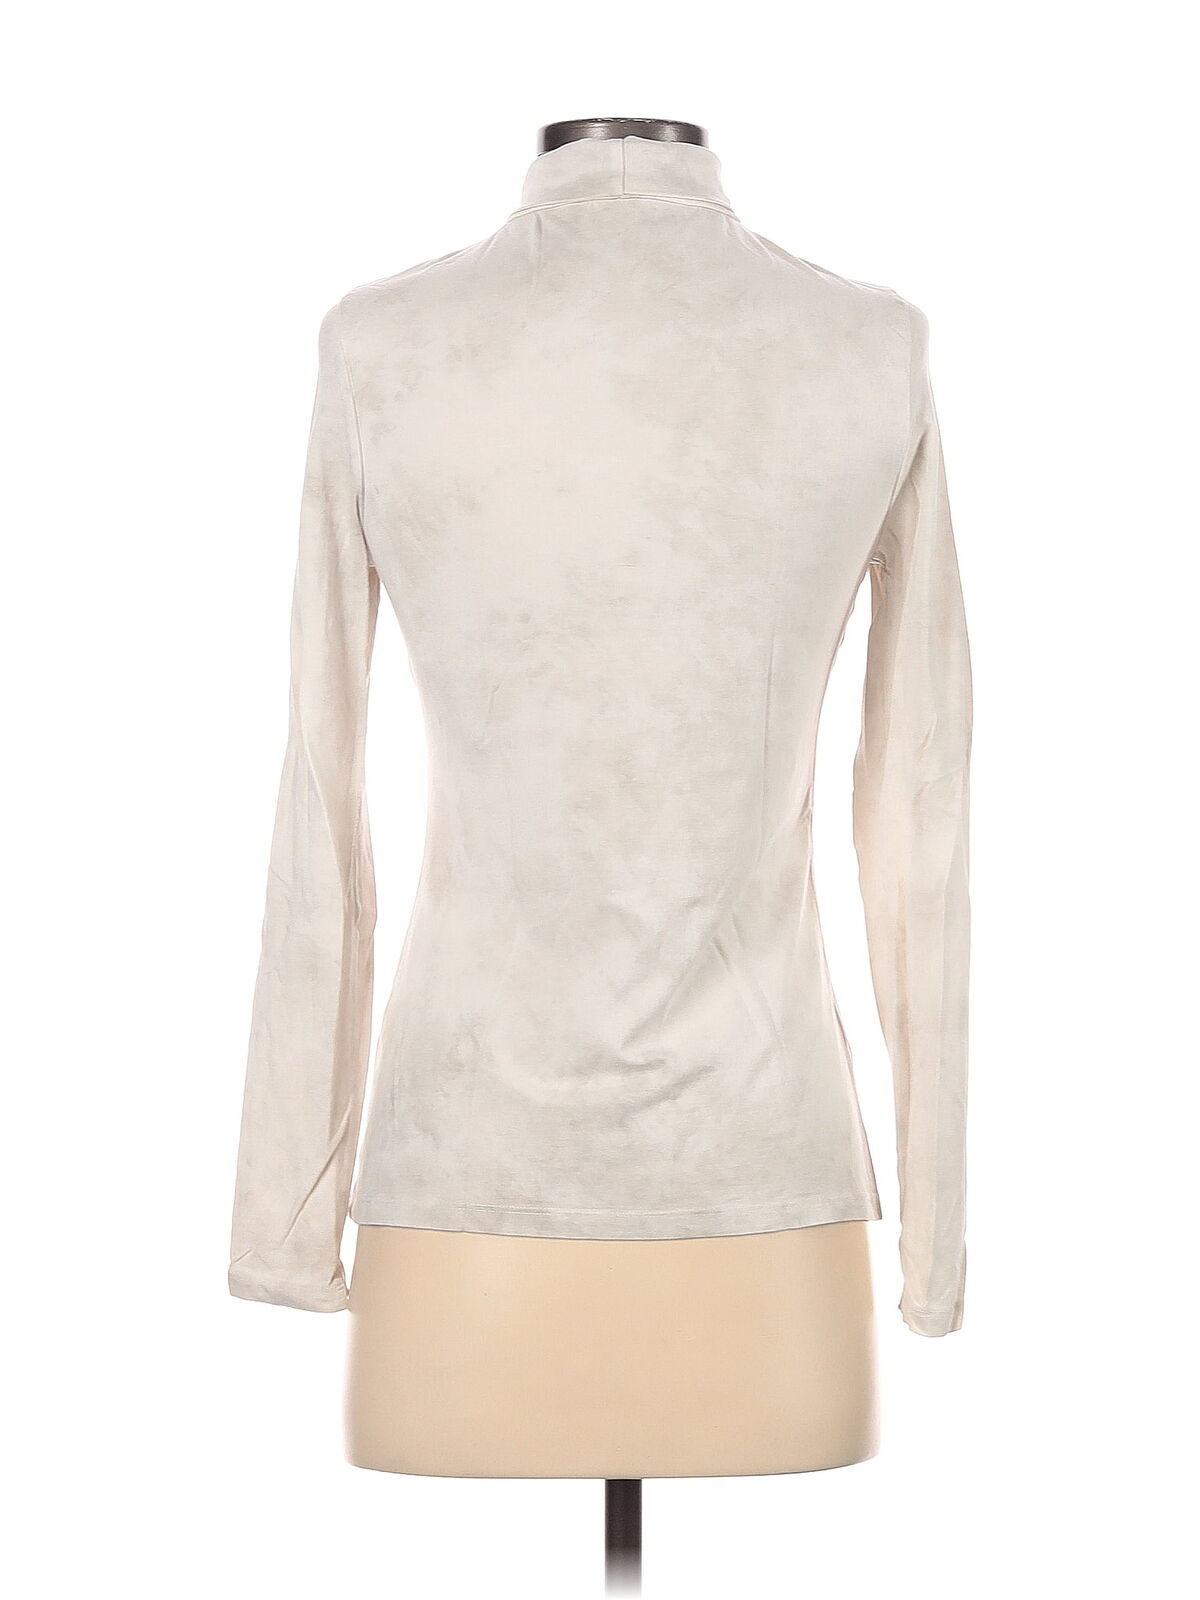 French Connection Women Ivory Turtleneck Sweater S - image 2